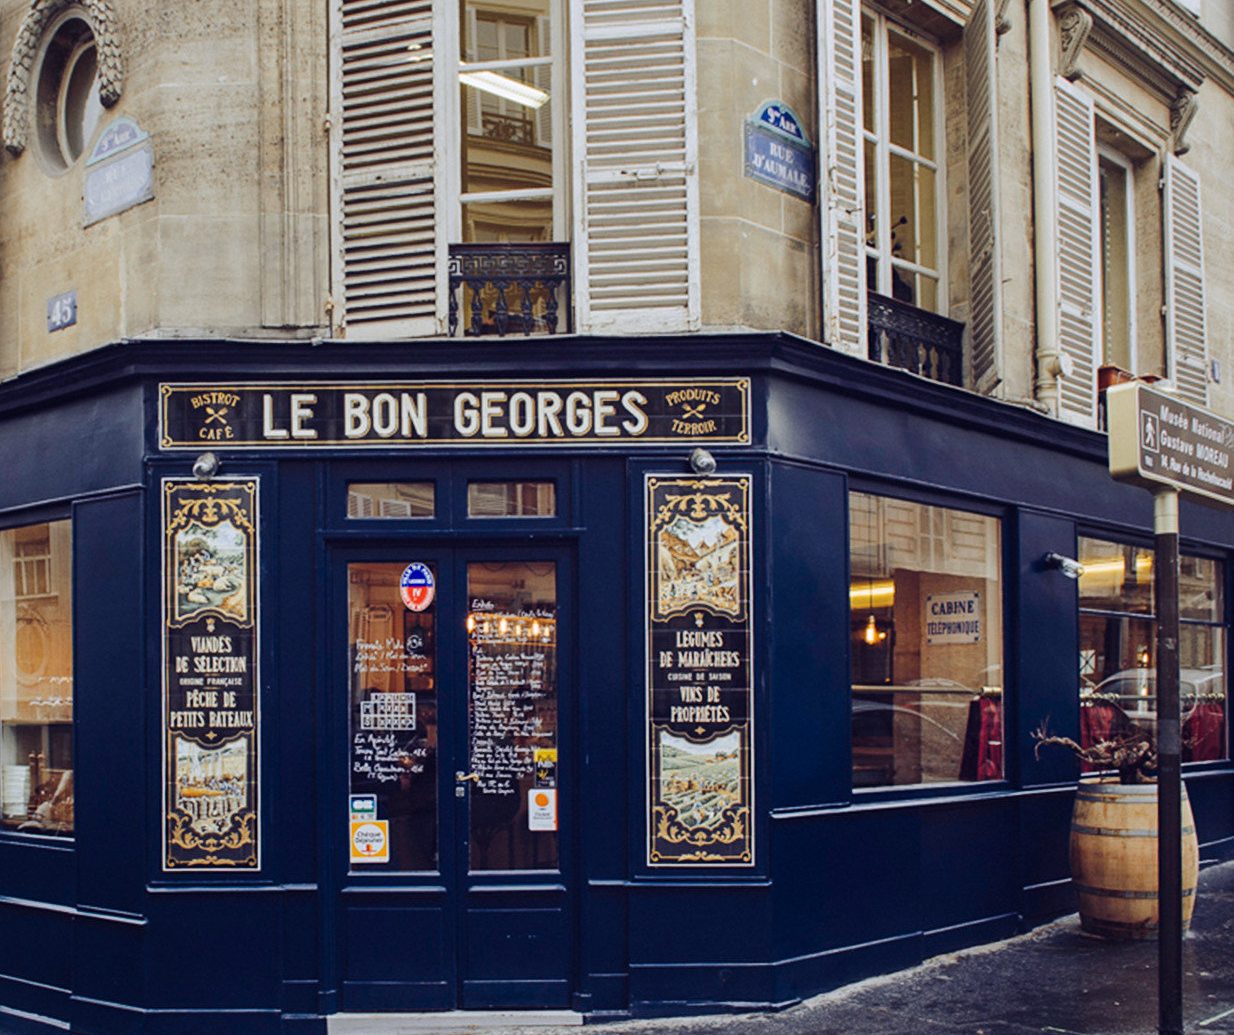 Food + Drink France Paris building outdoor street City window facade retail Business several